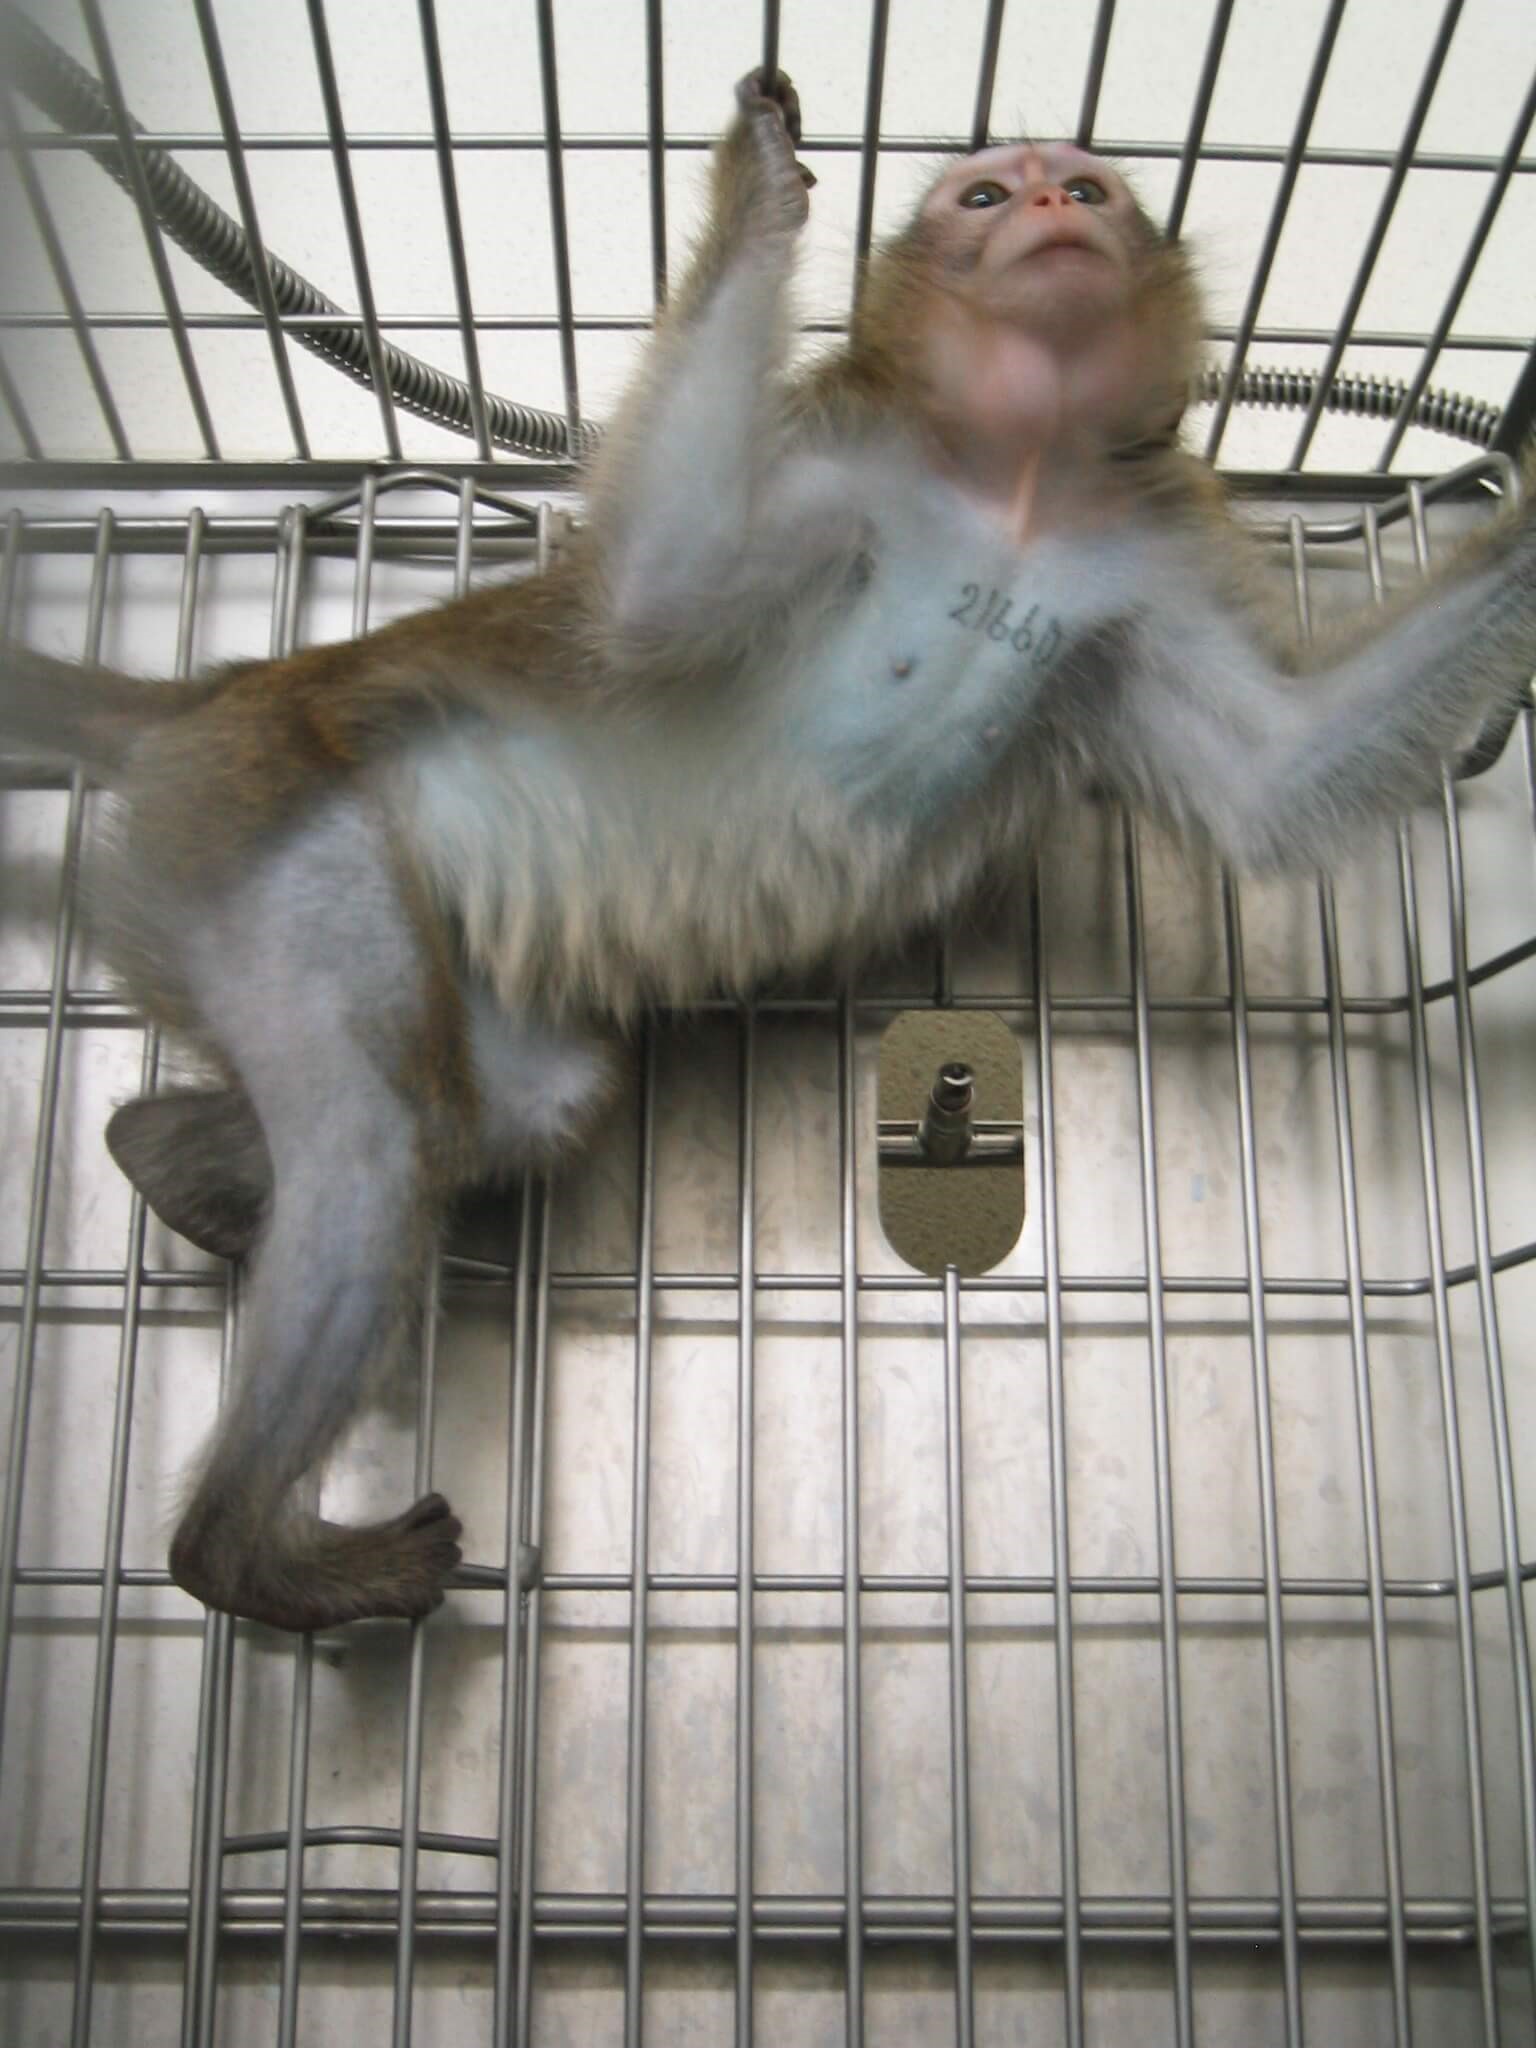 VIV 2005 02 12 covance monkey PO CMP ftc U.S. Fish and Wildlife Service: Add These Monkeys to the Endangered Species List!